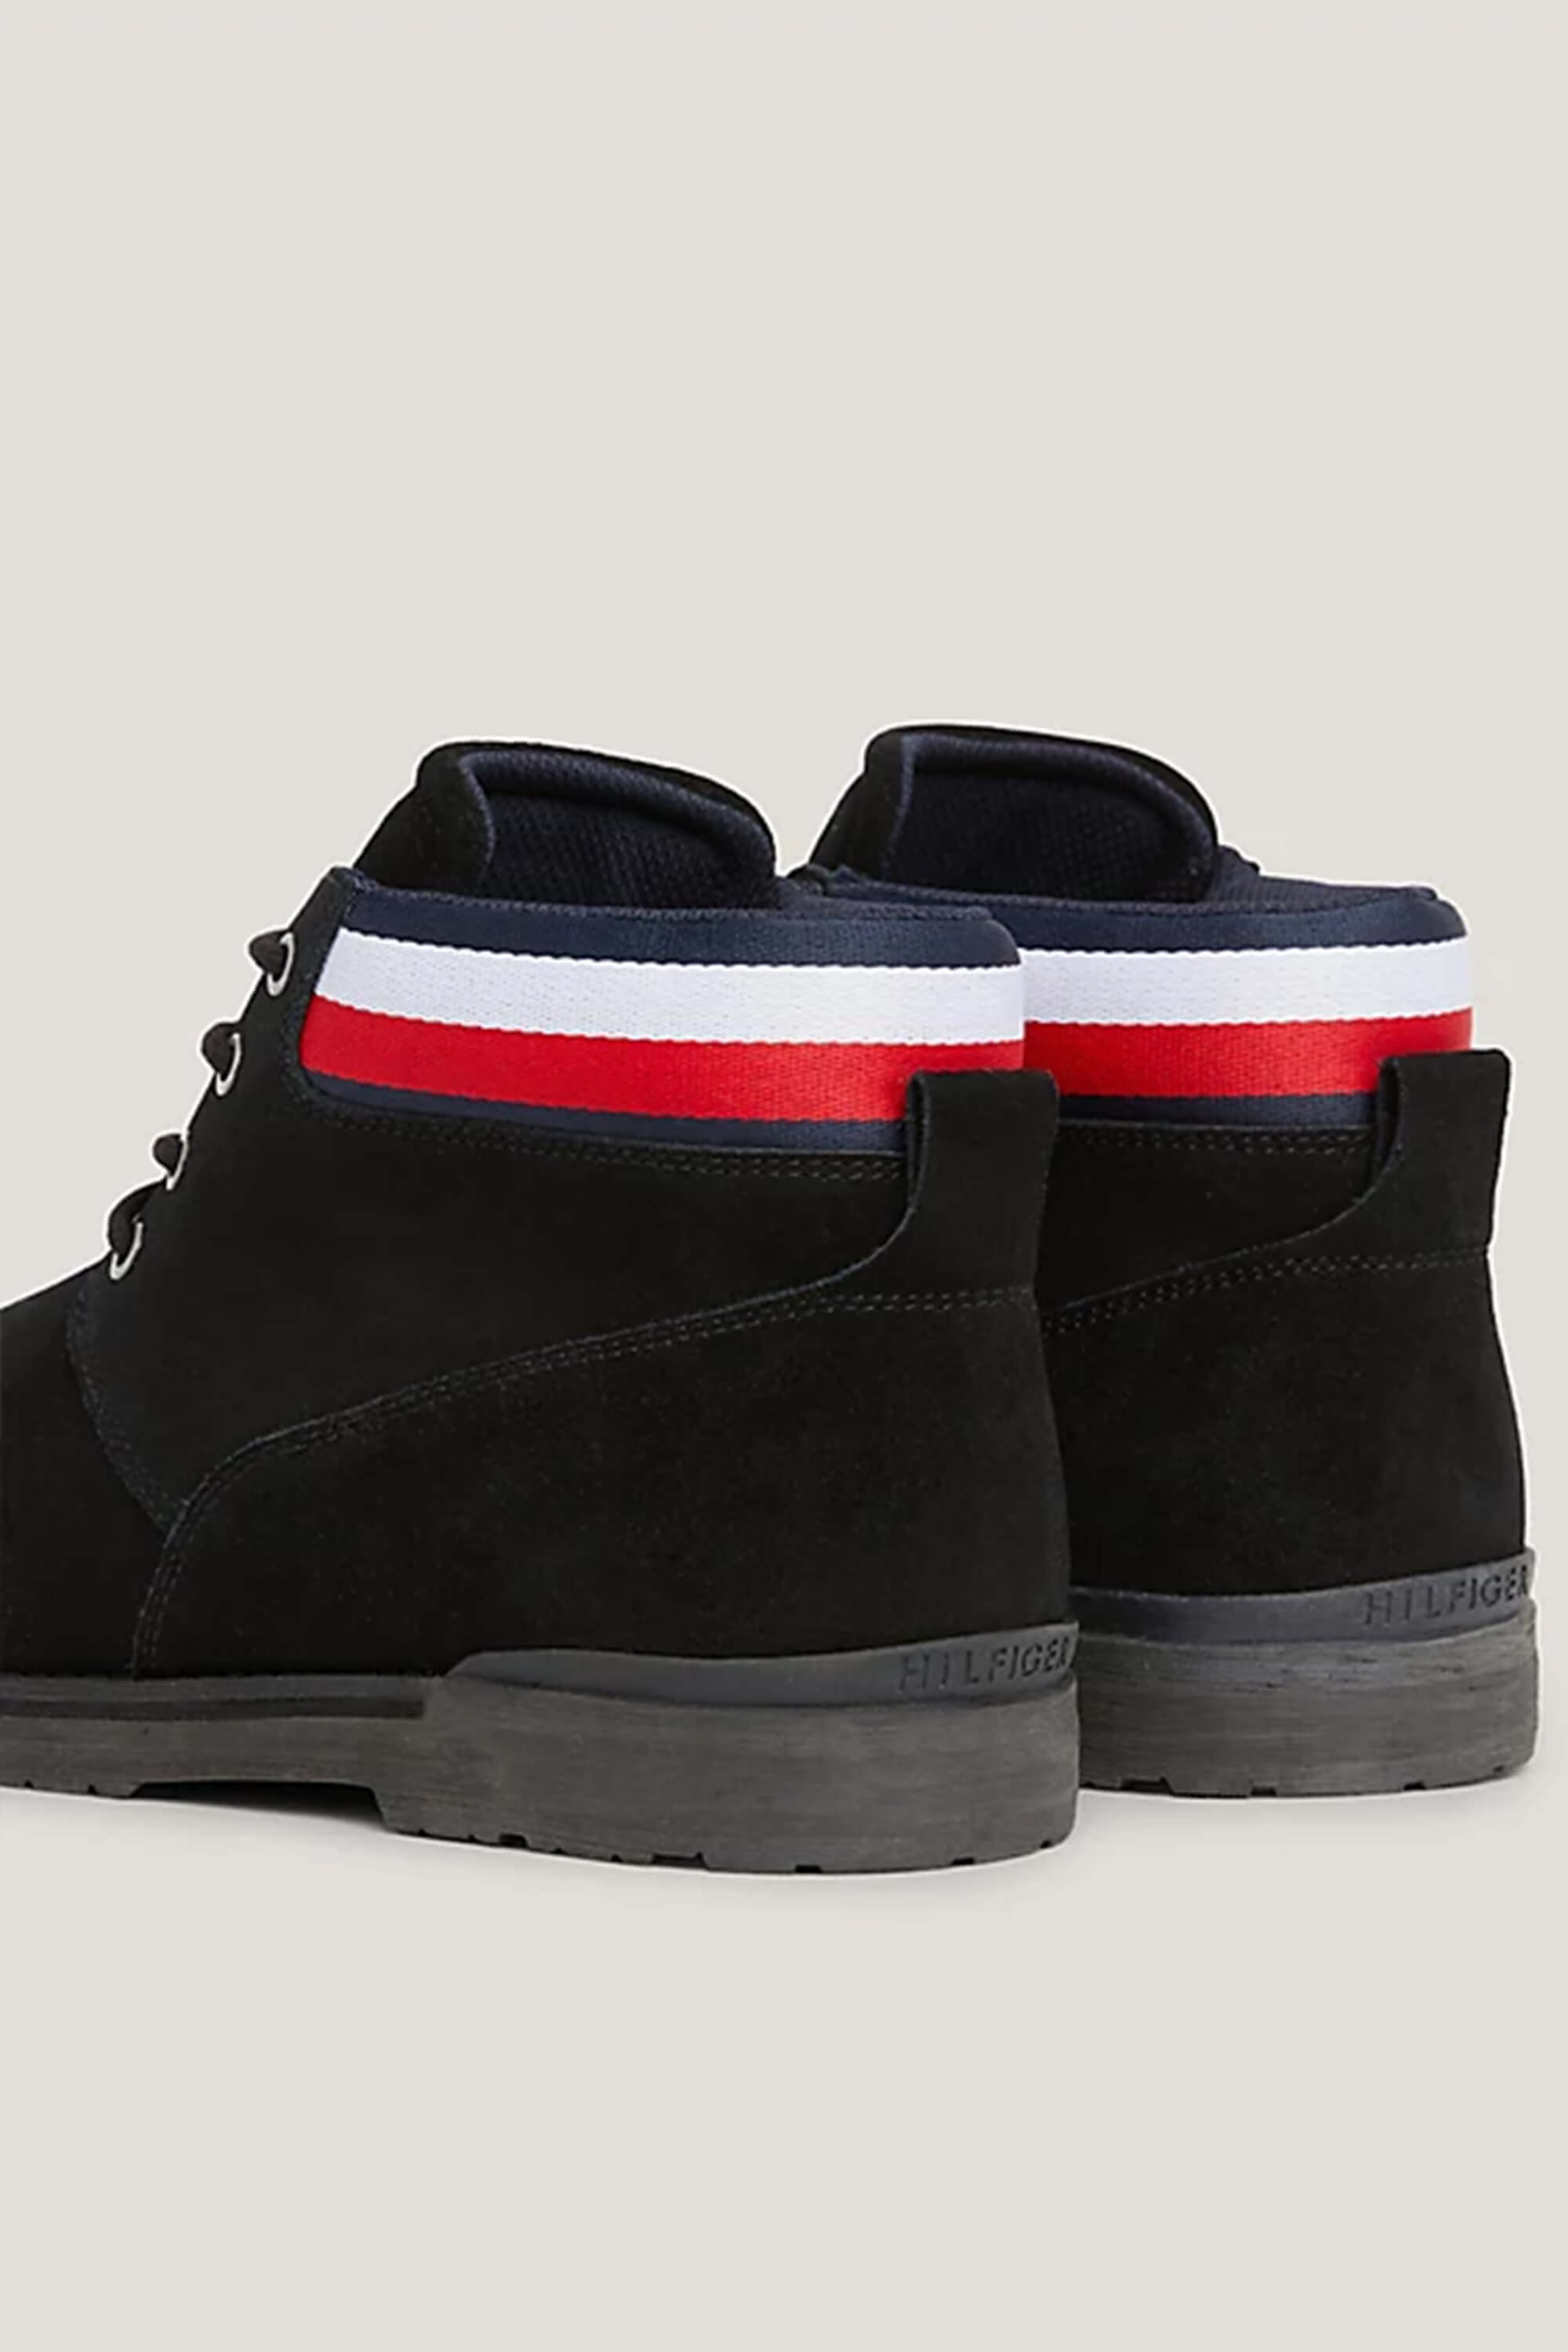 Tommy Hilfiger Core Suede Boot Black